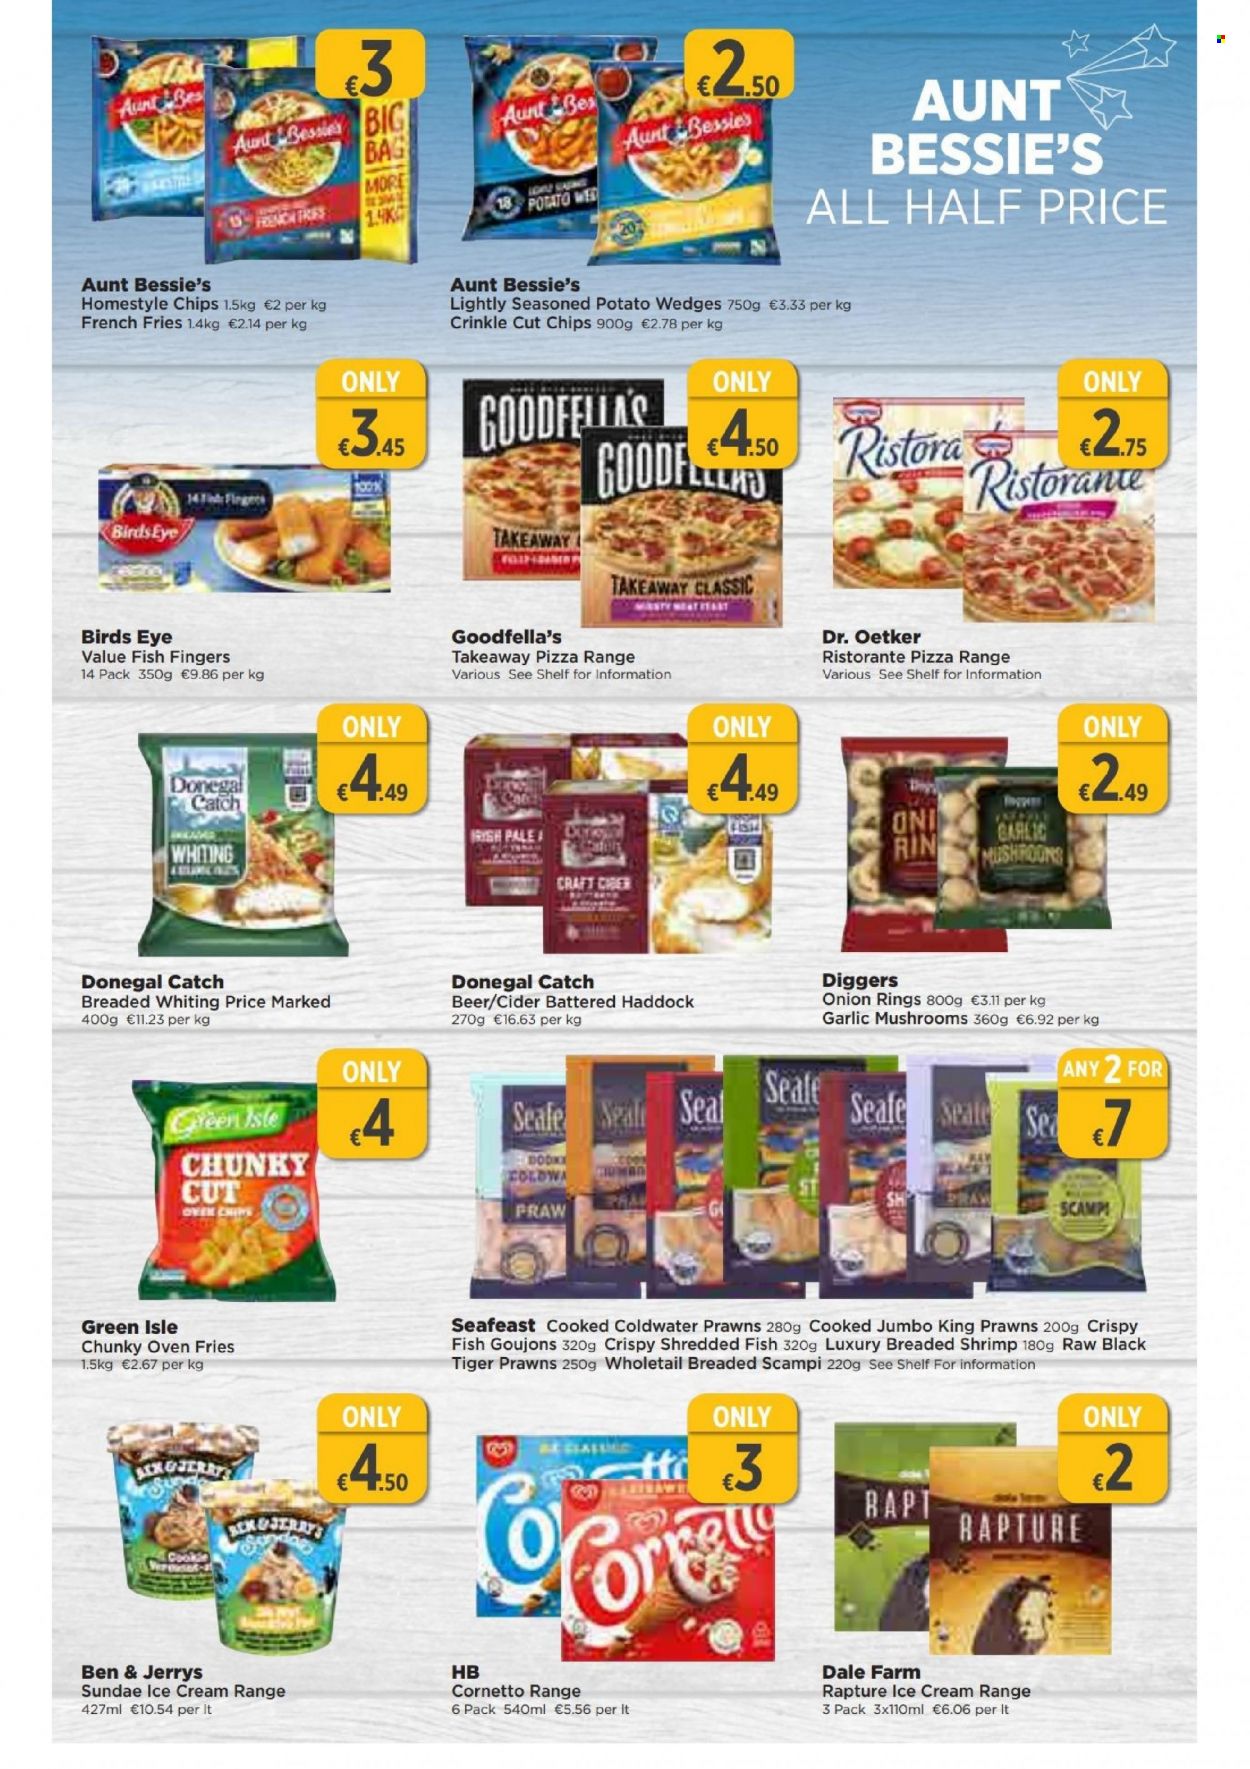 thumbnail - EUROSPAR offer  - 10.11.2022 - 30.11.2022 - Sales products - Aunt Bessie's, haddock, prawns, fish, shrimps, fish fingers, whiting, fish sticks, pizza, onion rings, Bird's Eye, Dr. Oetker, ice cream, Cornetto, Ben & Jerry's, Donegal Catch, potato fries, potato wedges, french fries, frozen chips, cider, beer, Rin. Page 9.